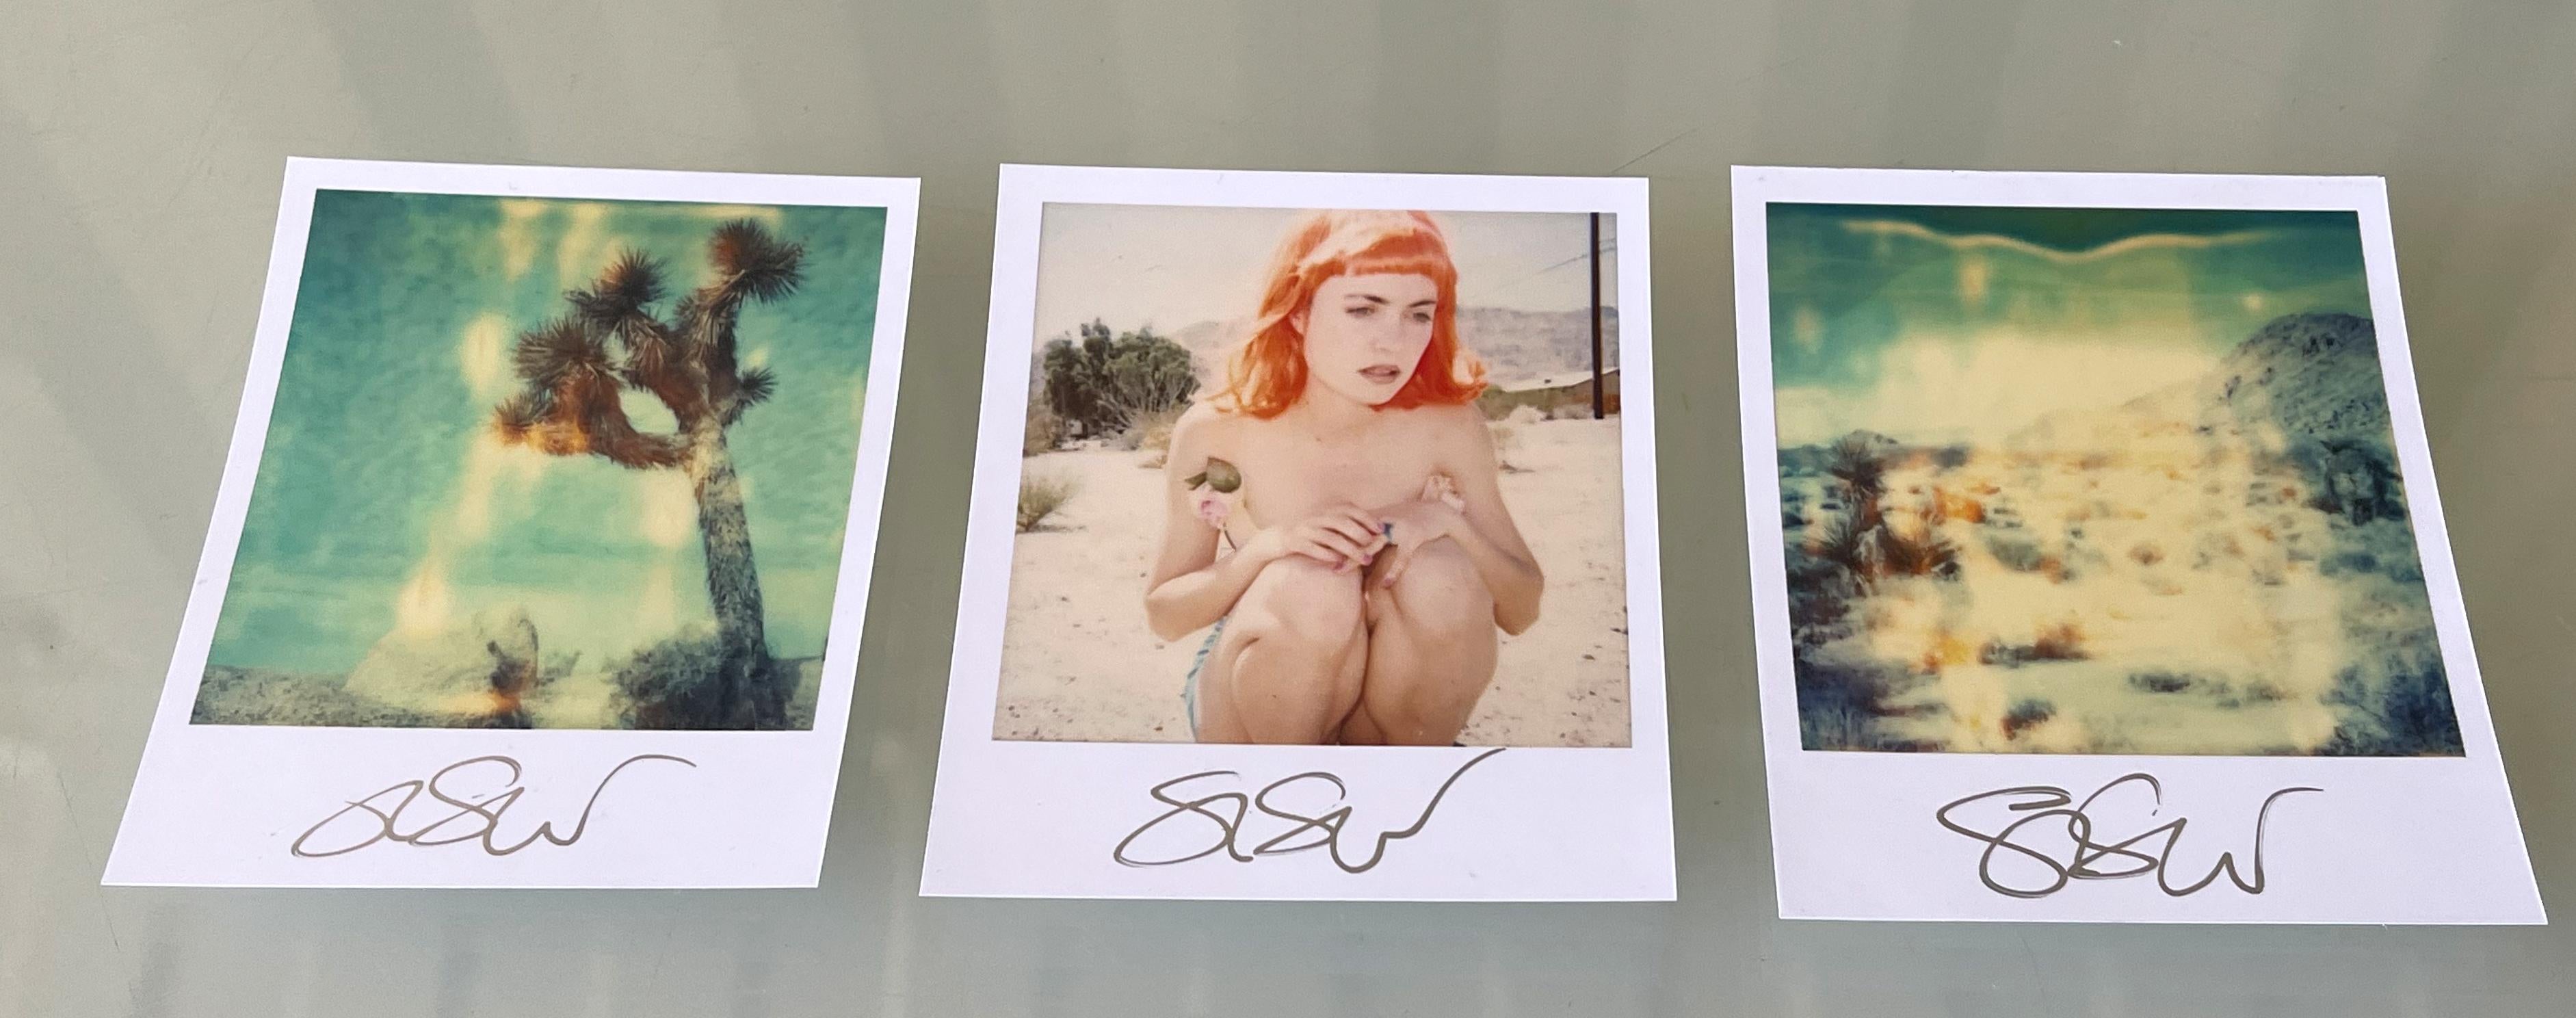 3 Stefanie Schneider Polaroid-sized unlimited Minis 
'Radha Mind Screen' - 1999 - triptych

signed in front, not mounted. 
3 Digital Color Photographs based on the 3 Polaroids. 
10.7 x 8.8cm (Image 7.9x7.7cm) each, 10.7 x 28.2cm installed.